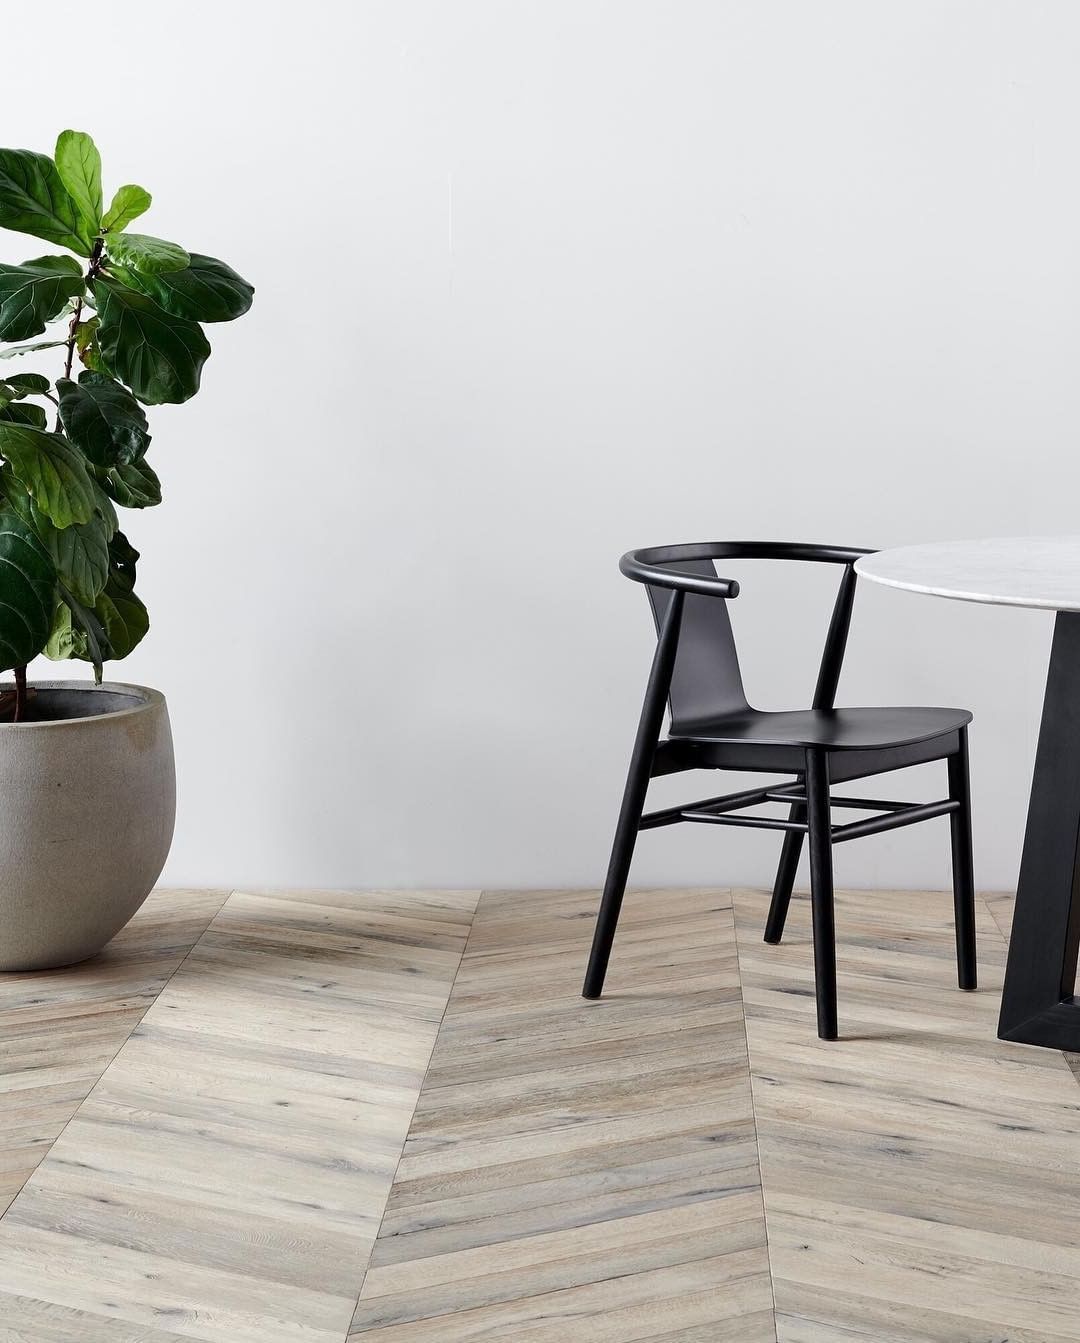 Archer | Black, Scandinavian Chairs, Wooden Dining Chairs With Arms | Set Of 2 | Black